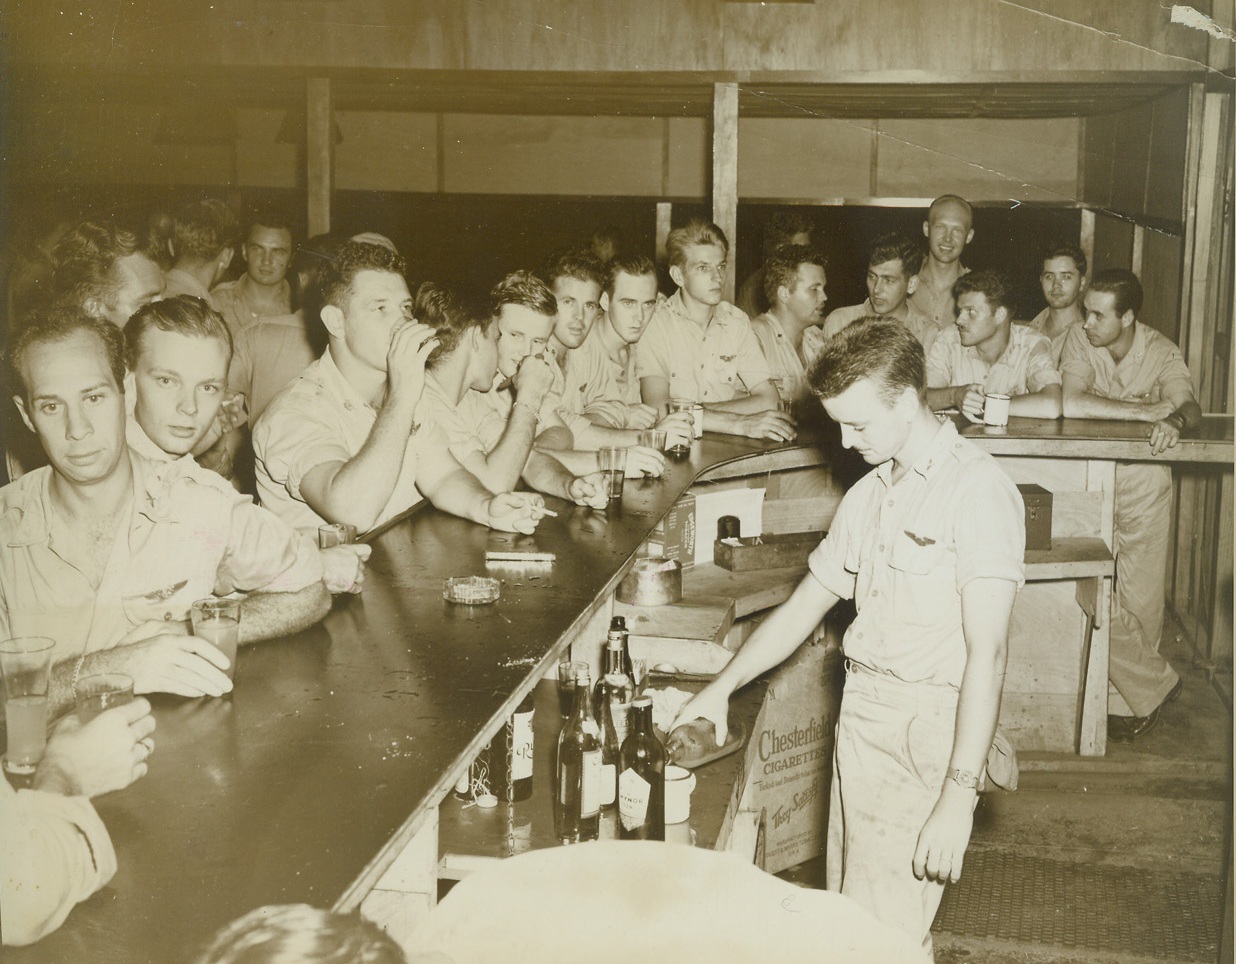 A Dream Come True, 12/20/1943. New Guinea – Officers of an advanced bombing unit of the 5th Air Force labored hard in their spare time, and out of salvaged materials constructed the most elegant club on New Guinea which boasts this long bar.  They surpassed their goal of creating a club worthy of the good old U.S. Credit (ACME photo by Thomas L. Shafer, War Pool correspondent);